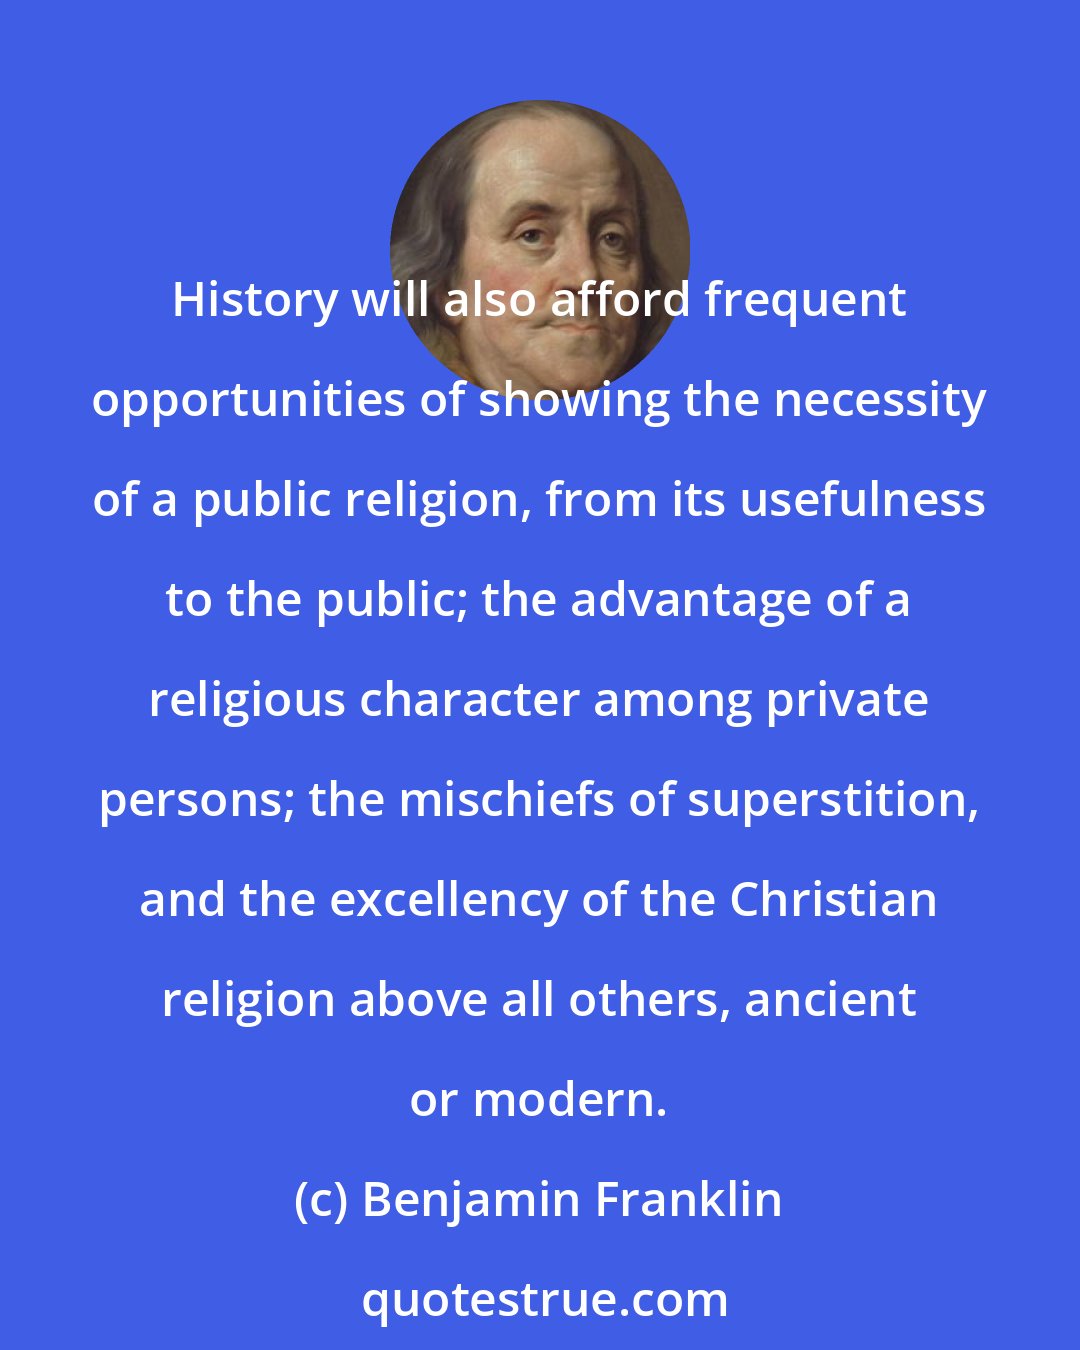 Benjamin Franklin: History will also afford frequent opportunities of showing the necessity of a public religion, from its usefulness to the public; the advantage of a religious character among private persons; the mischiefs of superstition, and the excellency of the Christian religion above all others, ancient or modern.